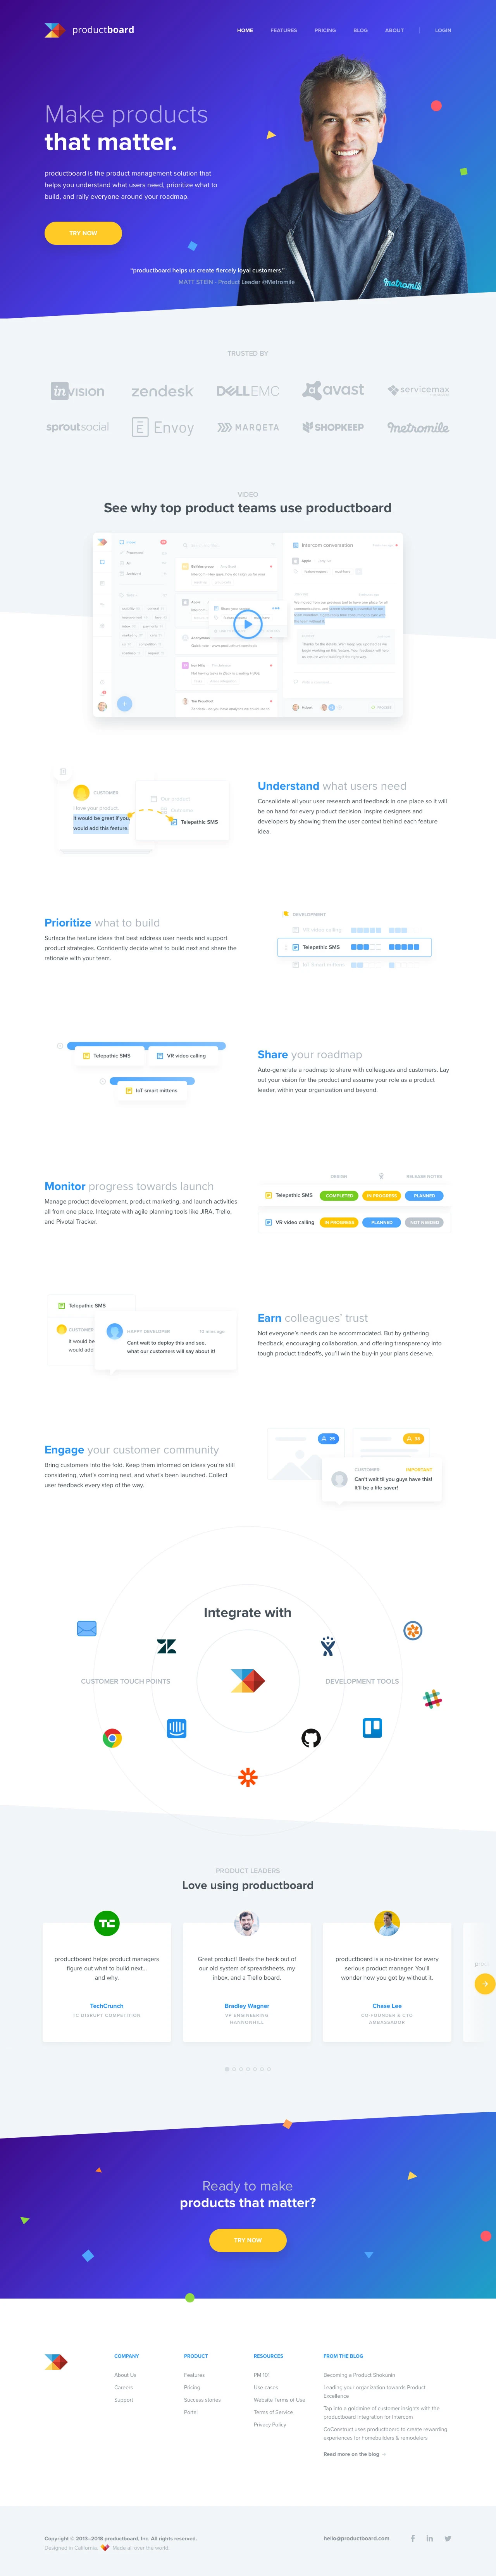 productboard Landing Page Example: productboard is the product management solution that helps you understand what users need, prioritize what to build, and rally everyone around your roadmap.